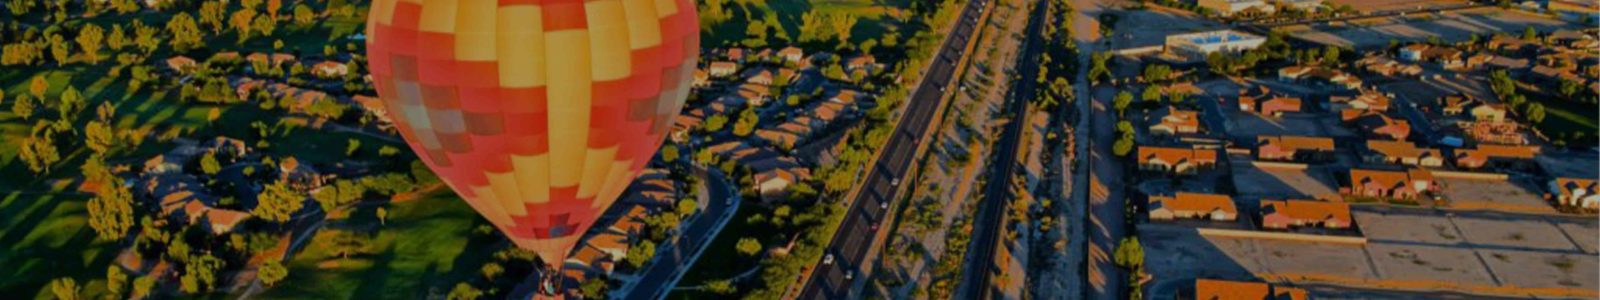 Aztec-style red and yellow hot air balloon above suburbs at evening